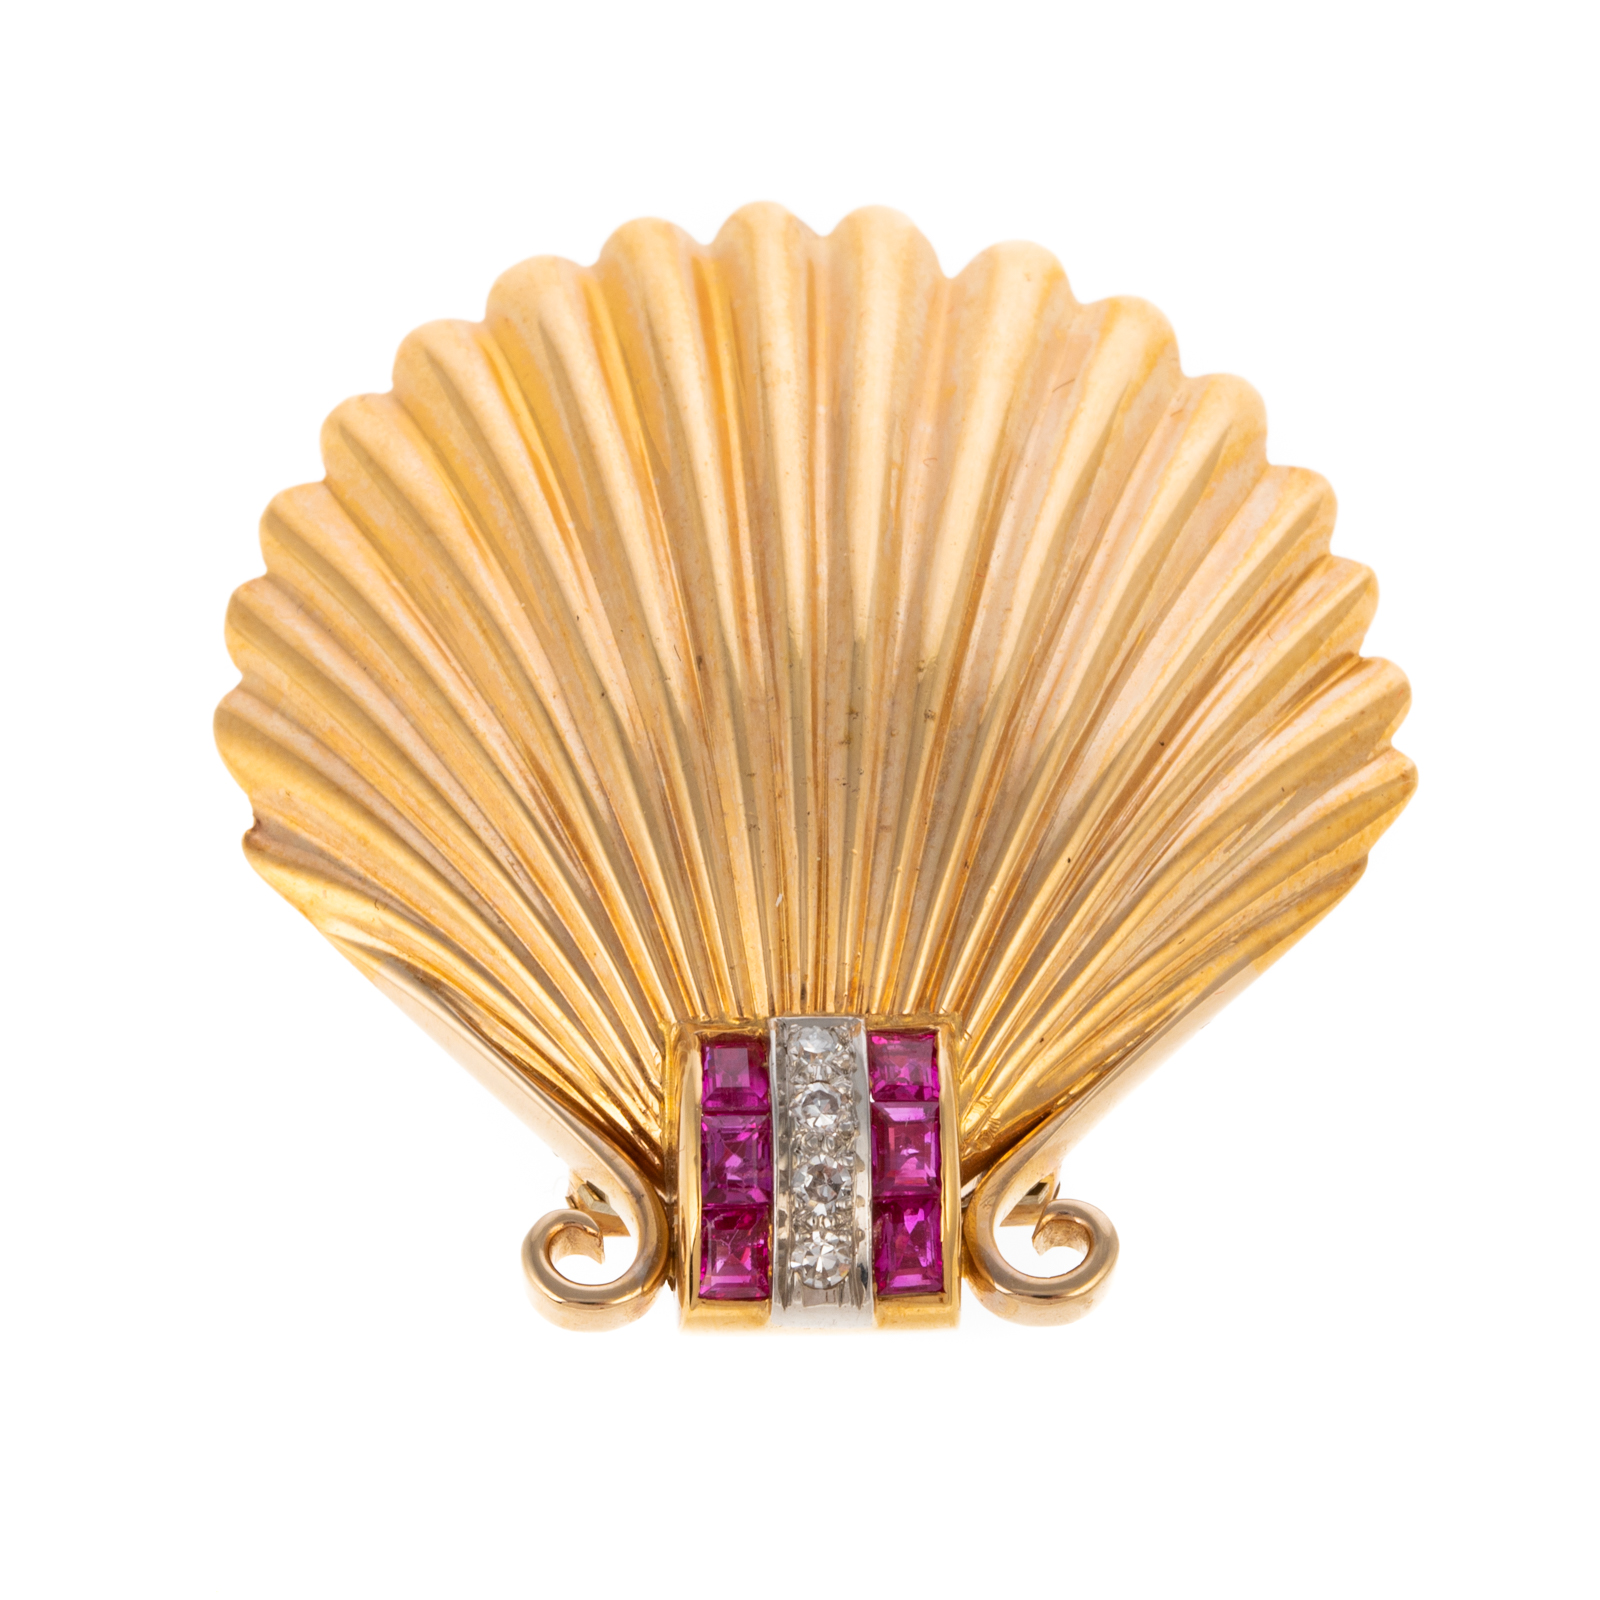 A 1940S SHELL PIN WITH RUBIES  338d46